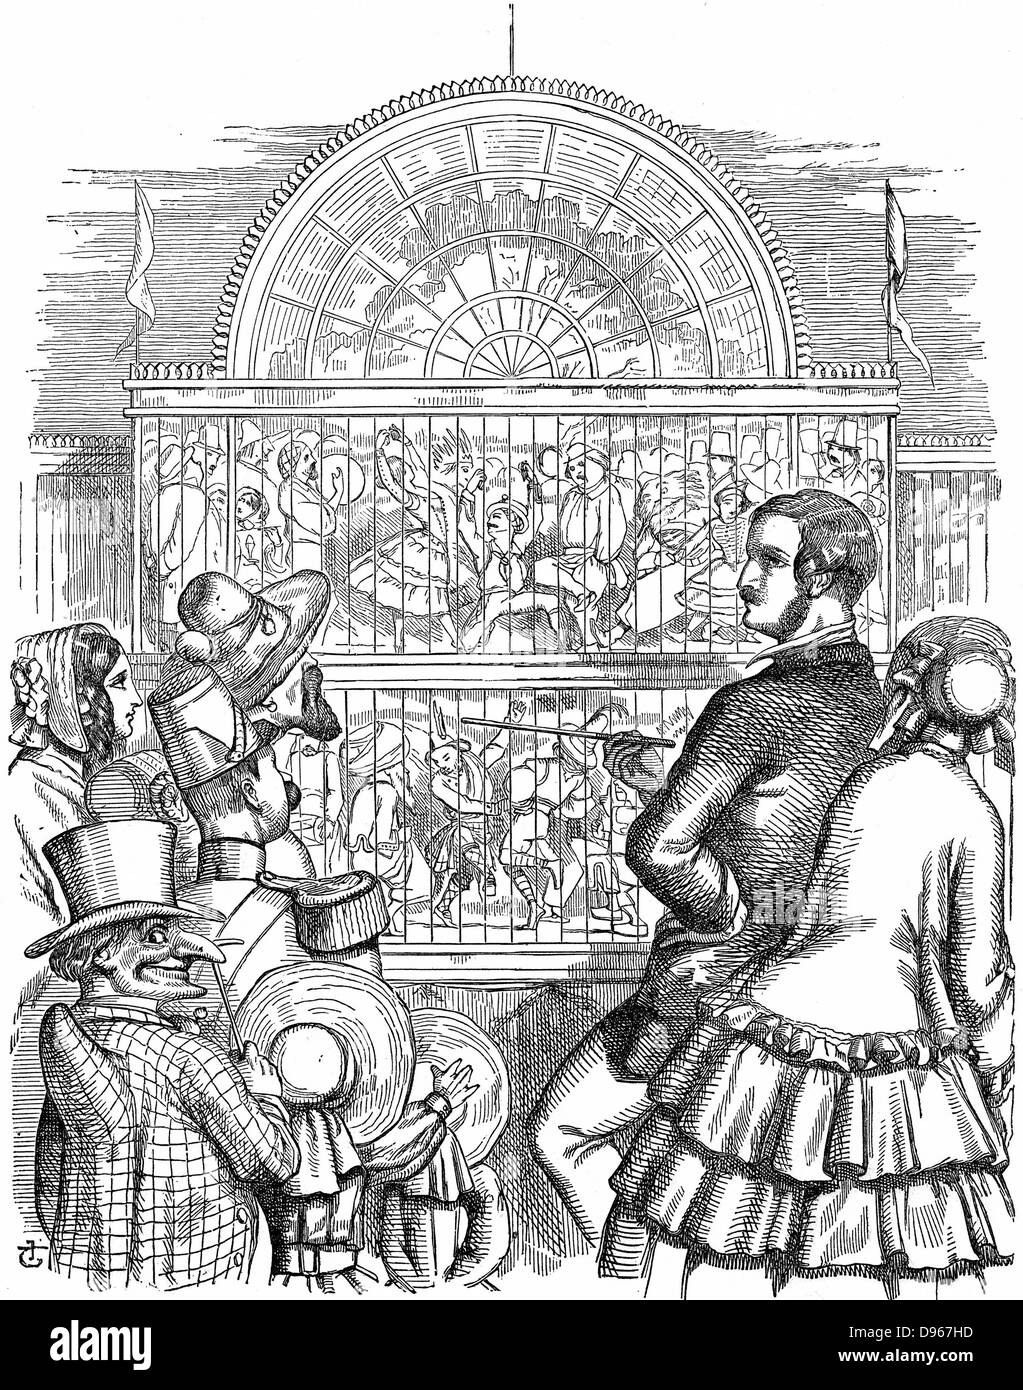 Albert, Prince Consort of Queen Victoria, showing off the Crystal Palace and the Great Exhibition in Hyde Park, London. John Tenniel cartoon from 'Punch' London 1851. Wood engraving Stock Photo